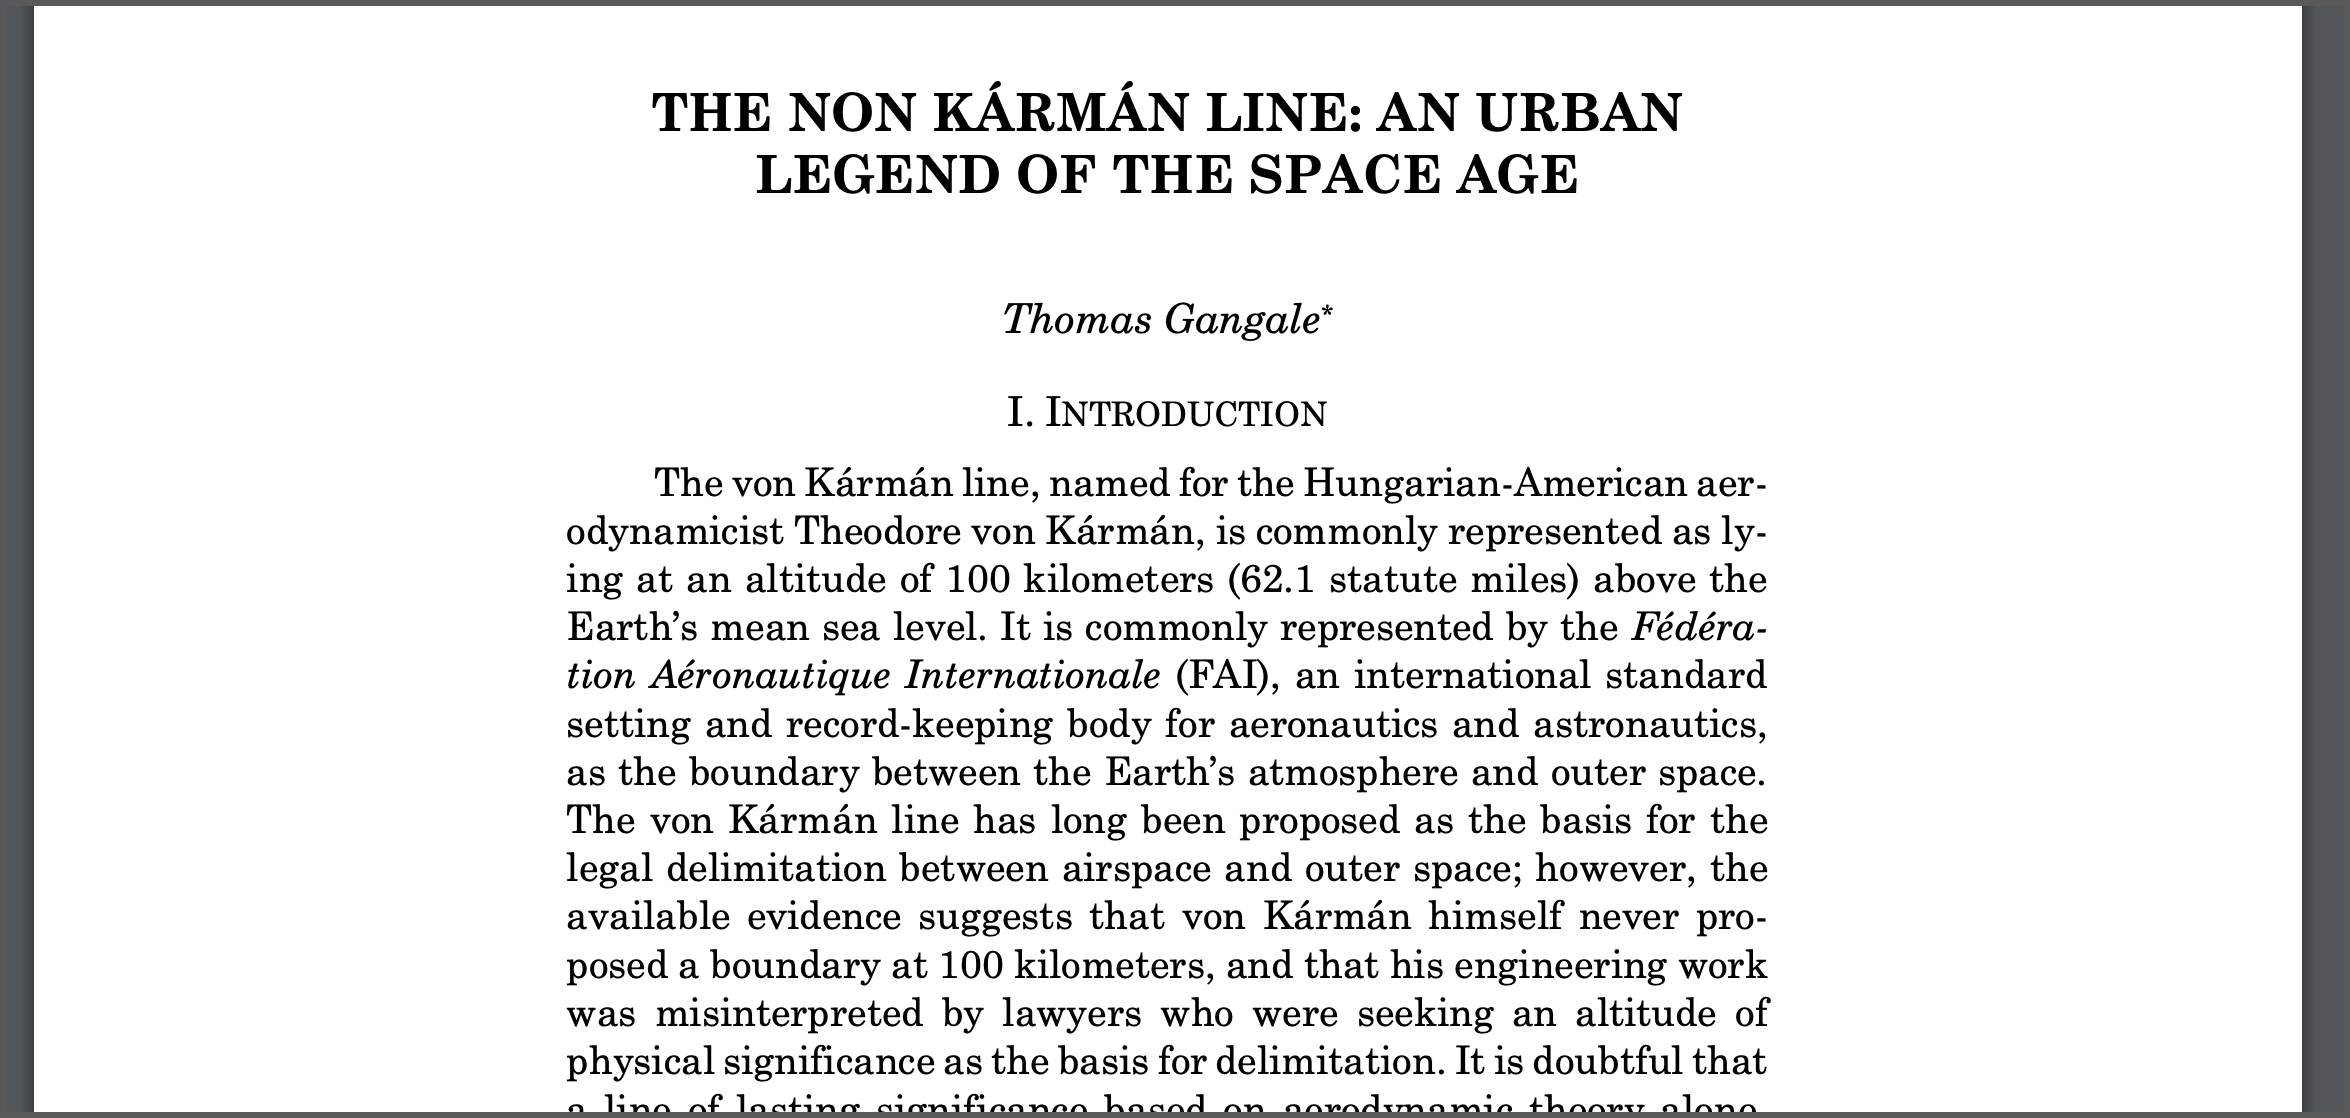 an urban legend of the space age